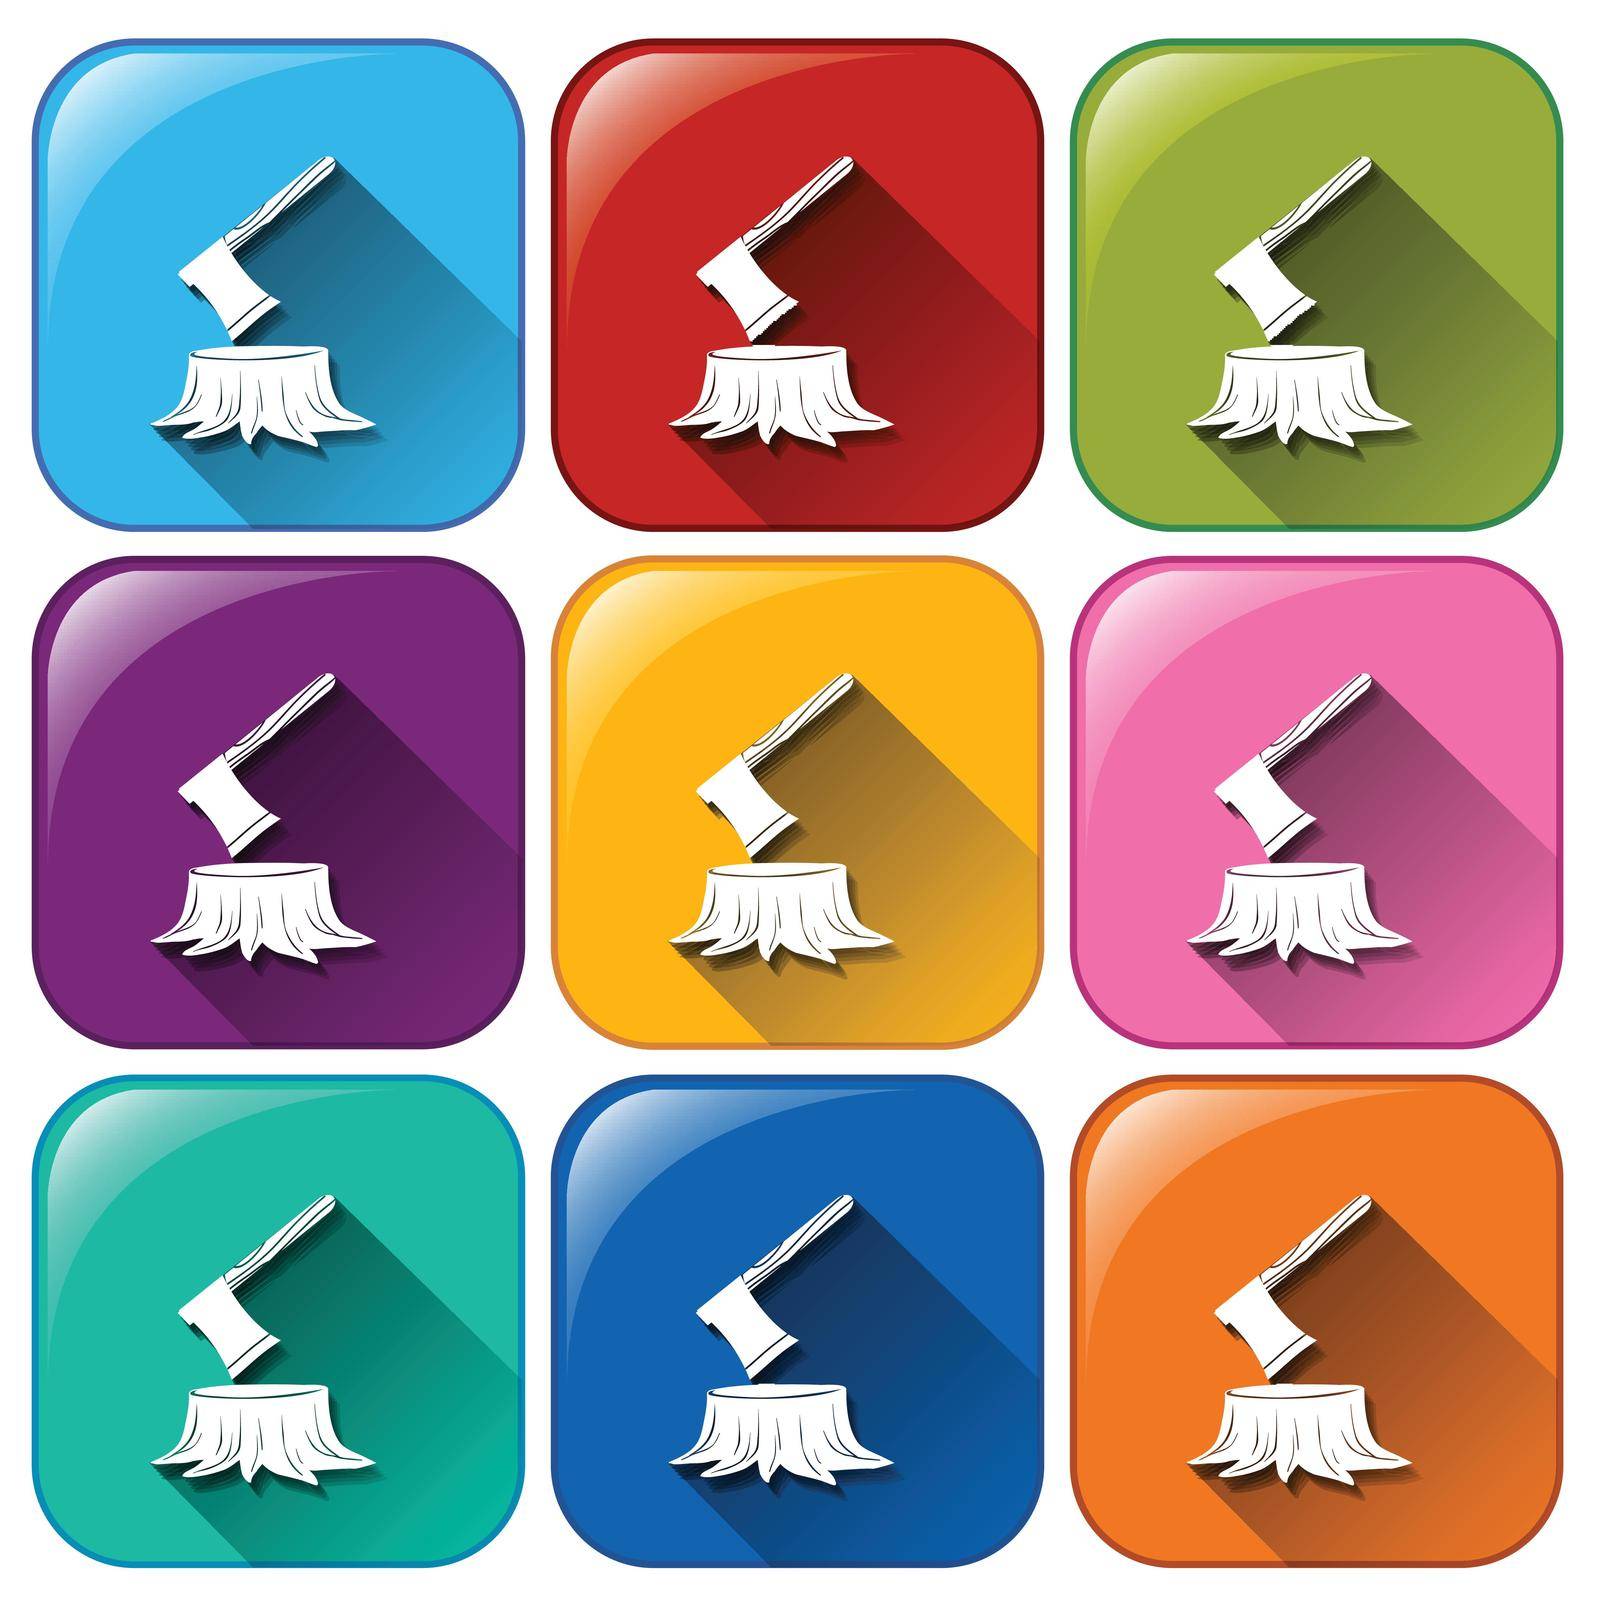 Illustration of the camping icons on a white background